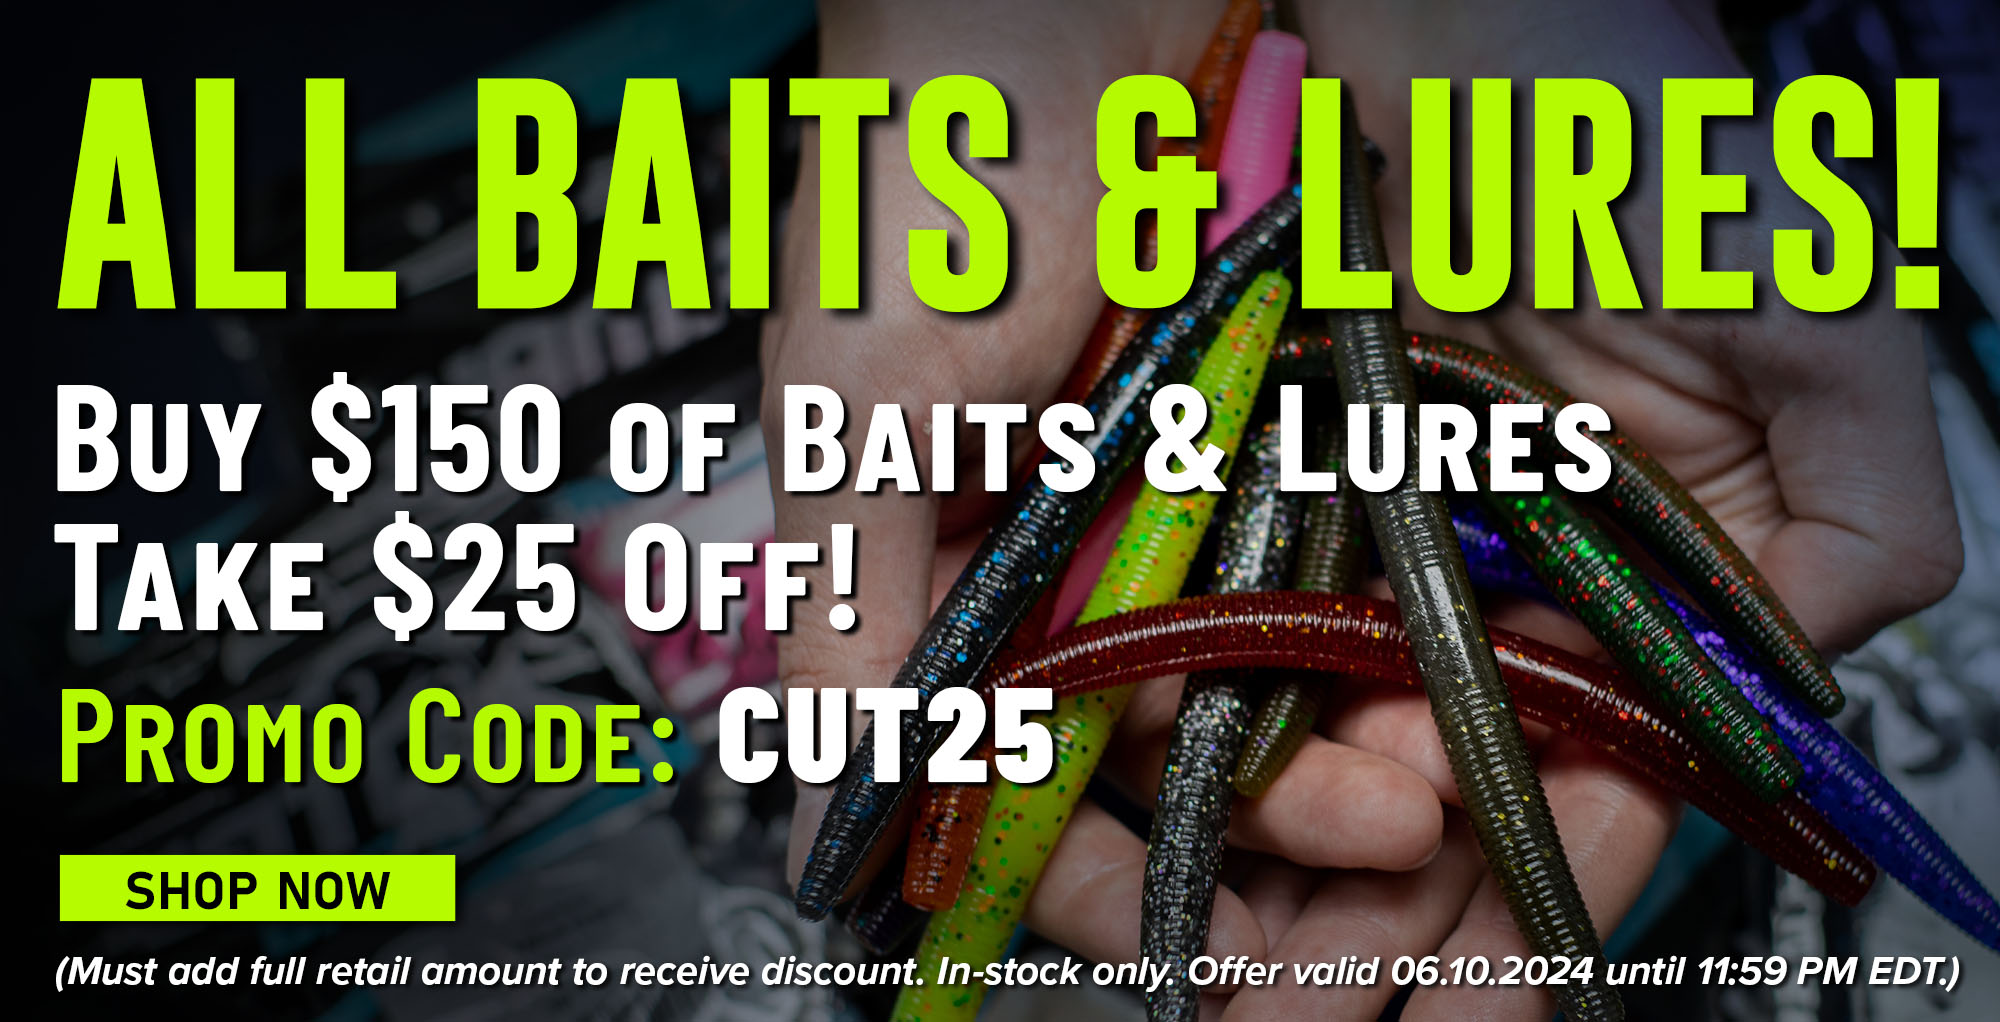 All Baits & Lures Buy $150 of Baits & Lures - Take $25 Off! Promo Code - CUT25 Shop Now (Must add full retail amount to receive discount. In-stock only. Offer valid 06.09.2024 until 11:59 PM EDT.)